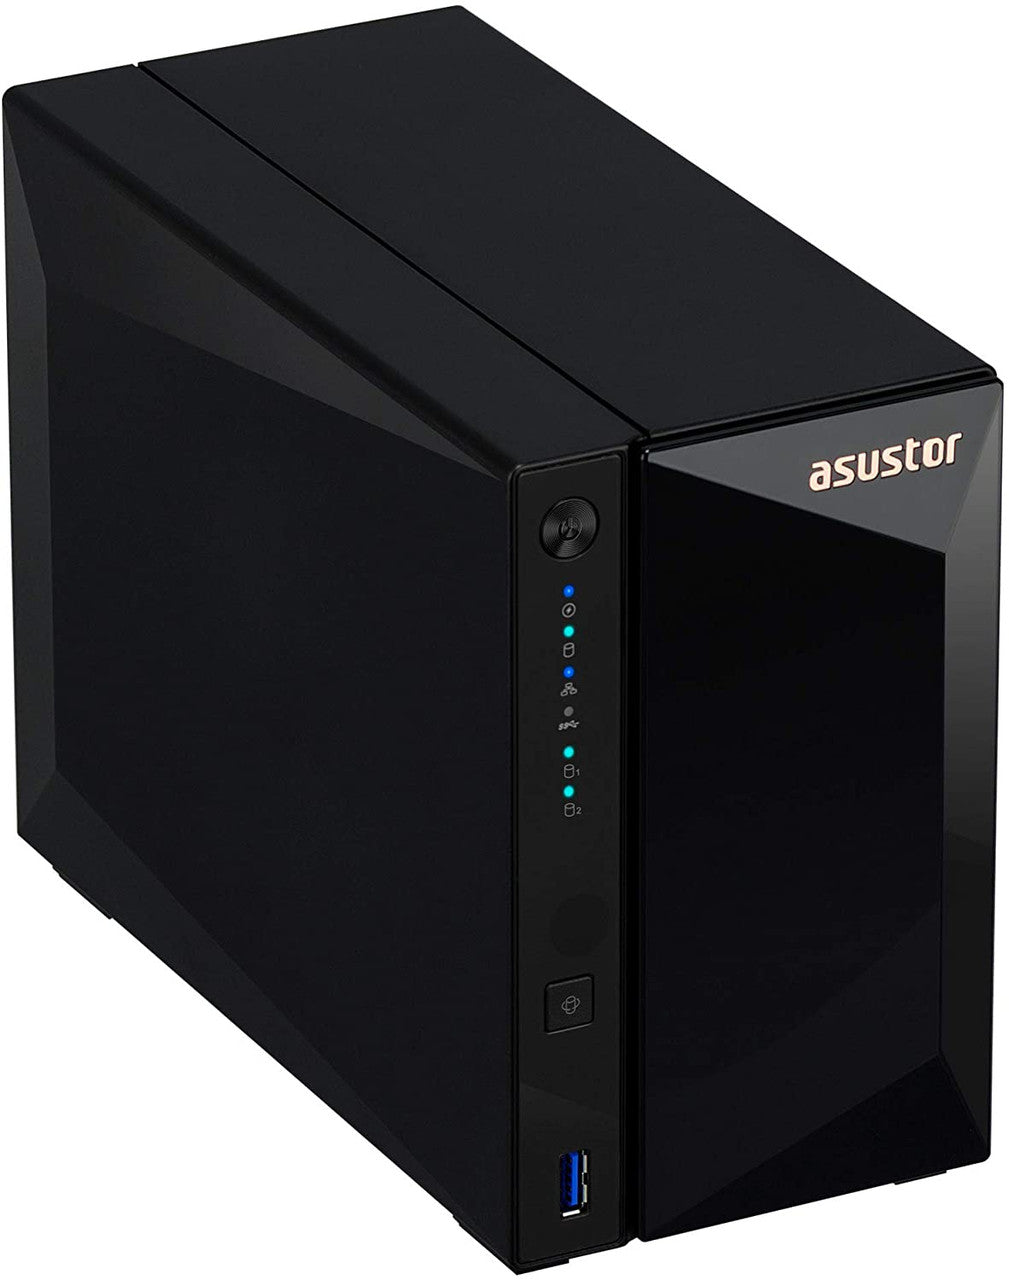 Asustor AS3302T 2-Bay Drivestor 2 PRO NAS with 2GB RAM and 28TB (2x14TB) Western Digital RED Plus Drives Fully Assembled and Tested